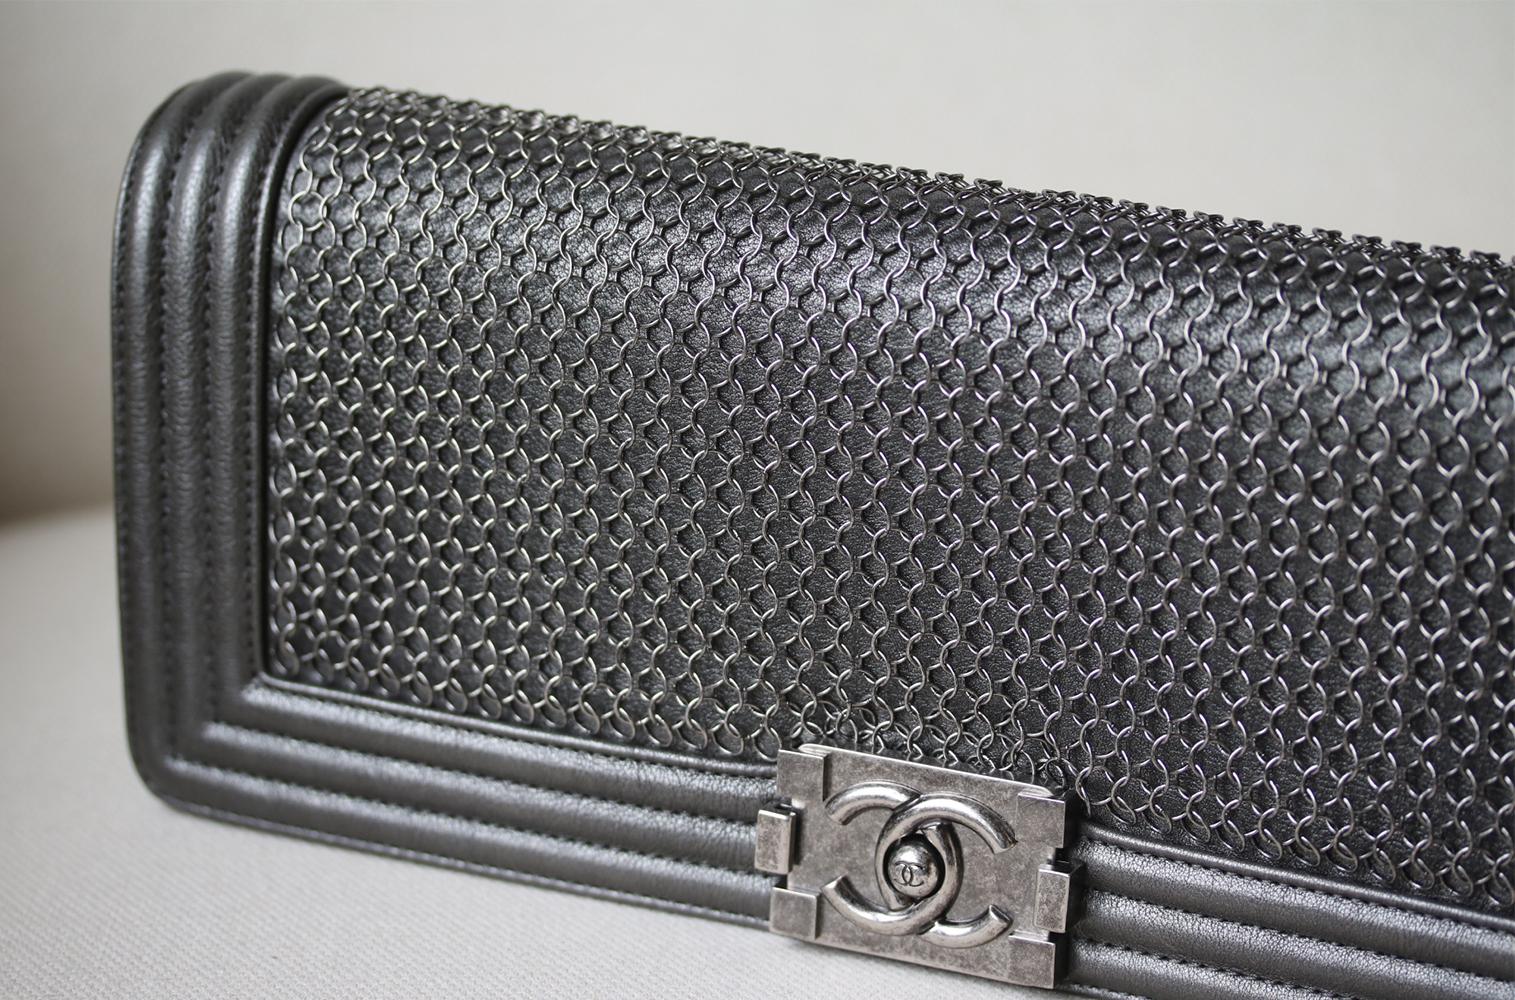 Chanel Metallic Chainmail and Leather Long Boy Clutch. Features metallic gunmetal-silver leather and chainmail detail. Gunmetal-silver hardware, and black fabric lining. Flap compartments. Zip interior pocket. Made in Italy. Does not come with a